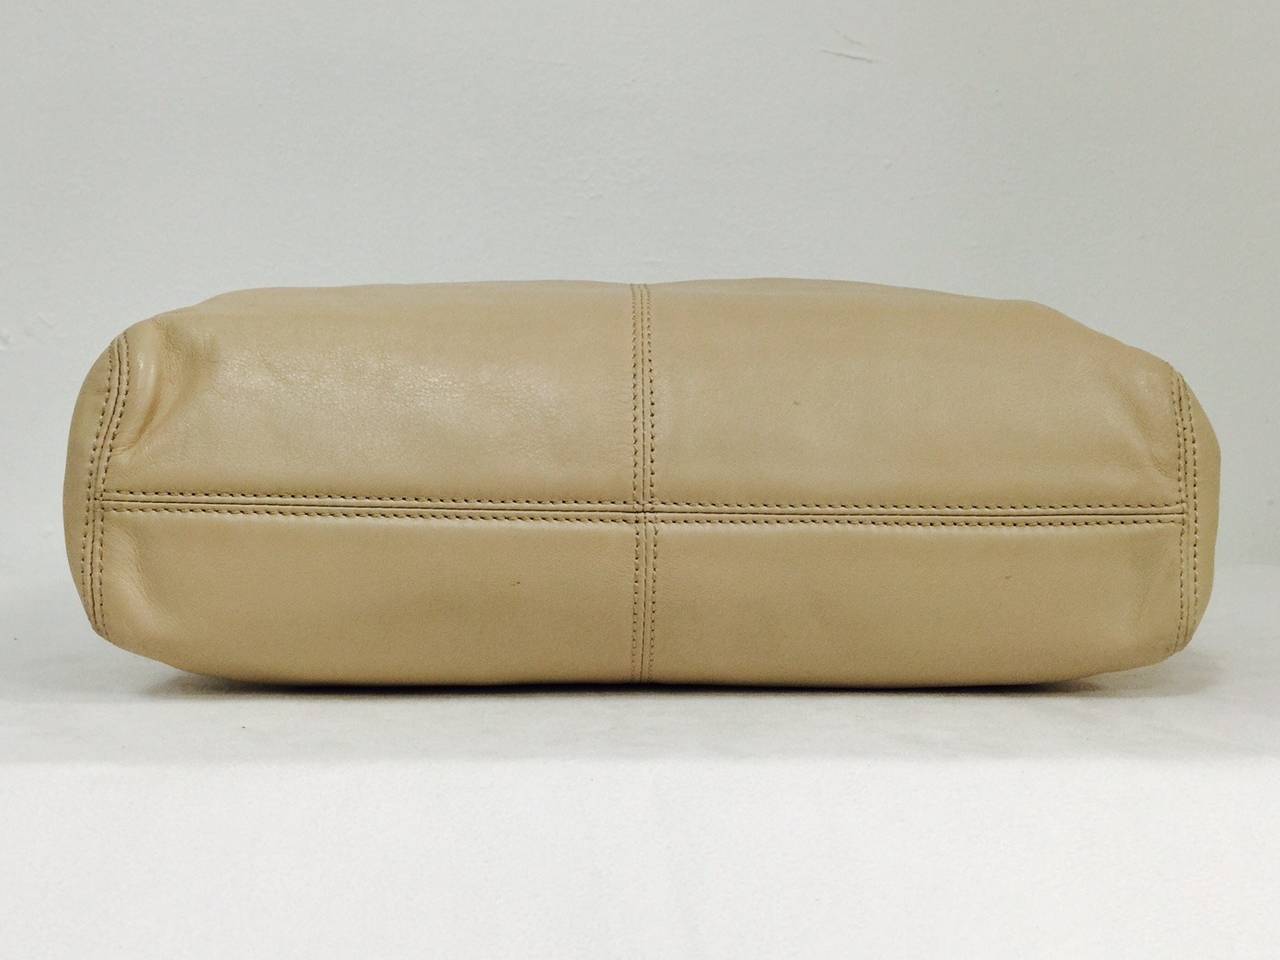 1990s Chanel Tan Lambskin Shoulder Bag With Leather Woven Resin Strap 3